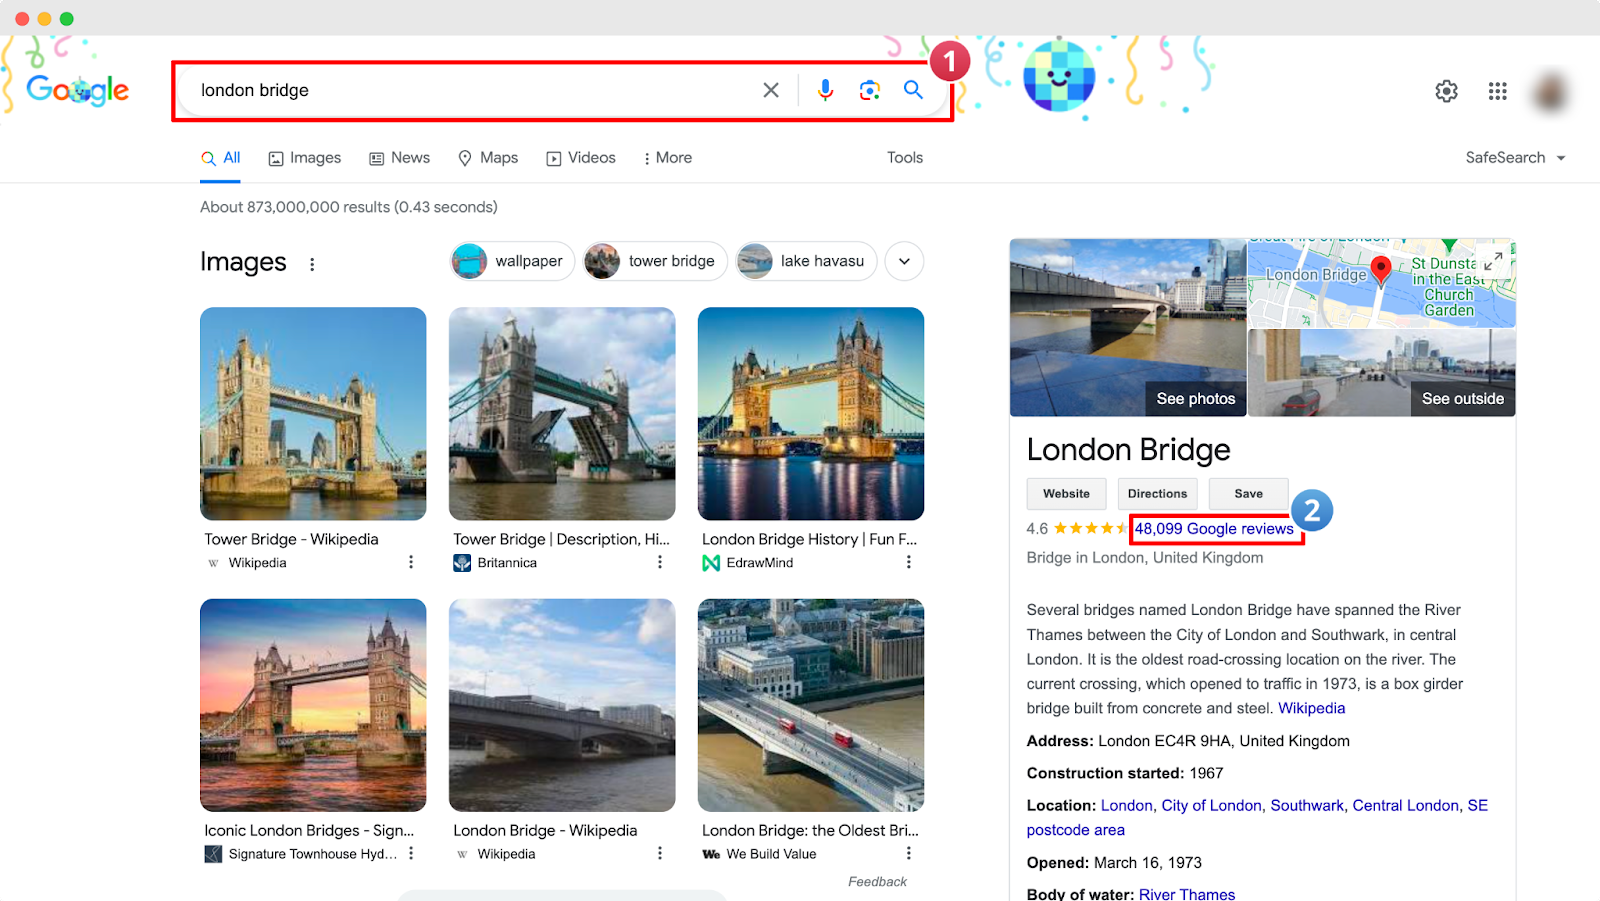 How To Find & Add Review Link For Google